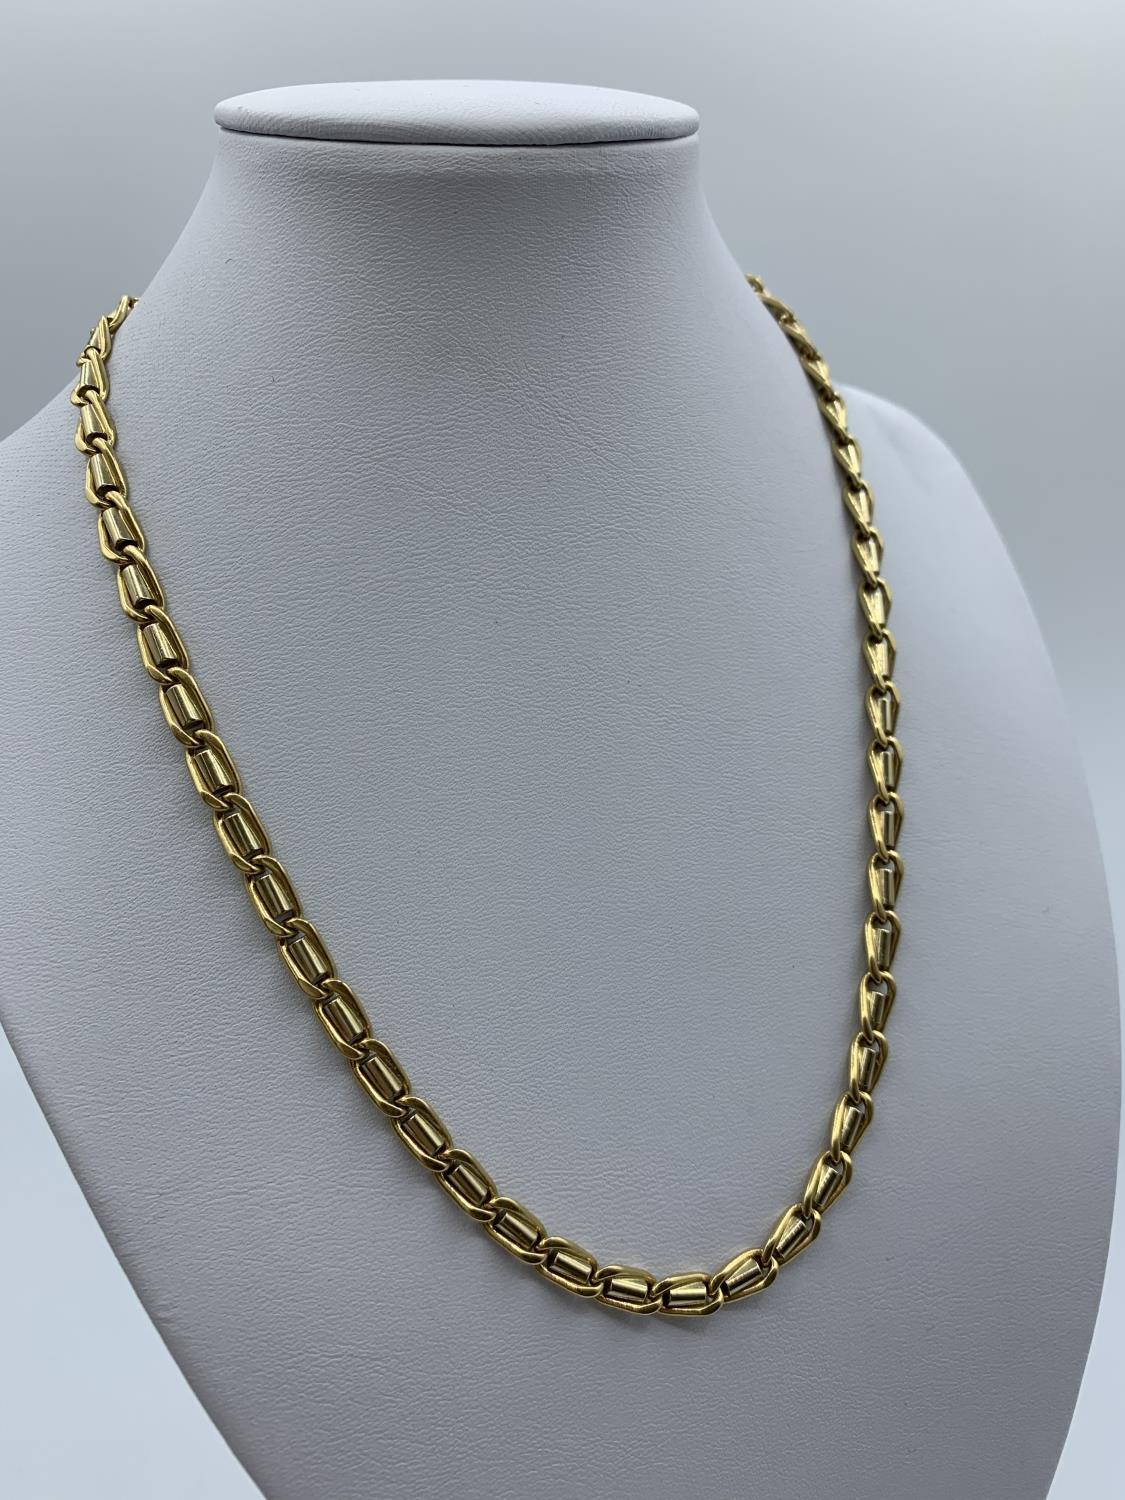 18ct yellow and white Gold designer Necklace, weight 44.7g and 42cm long - Image 9 of 20